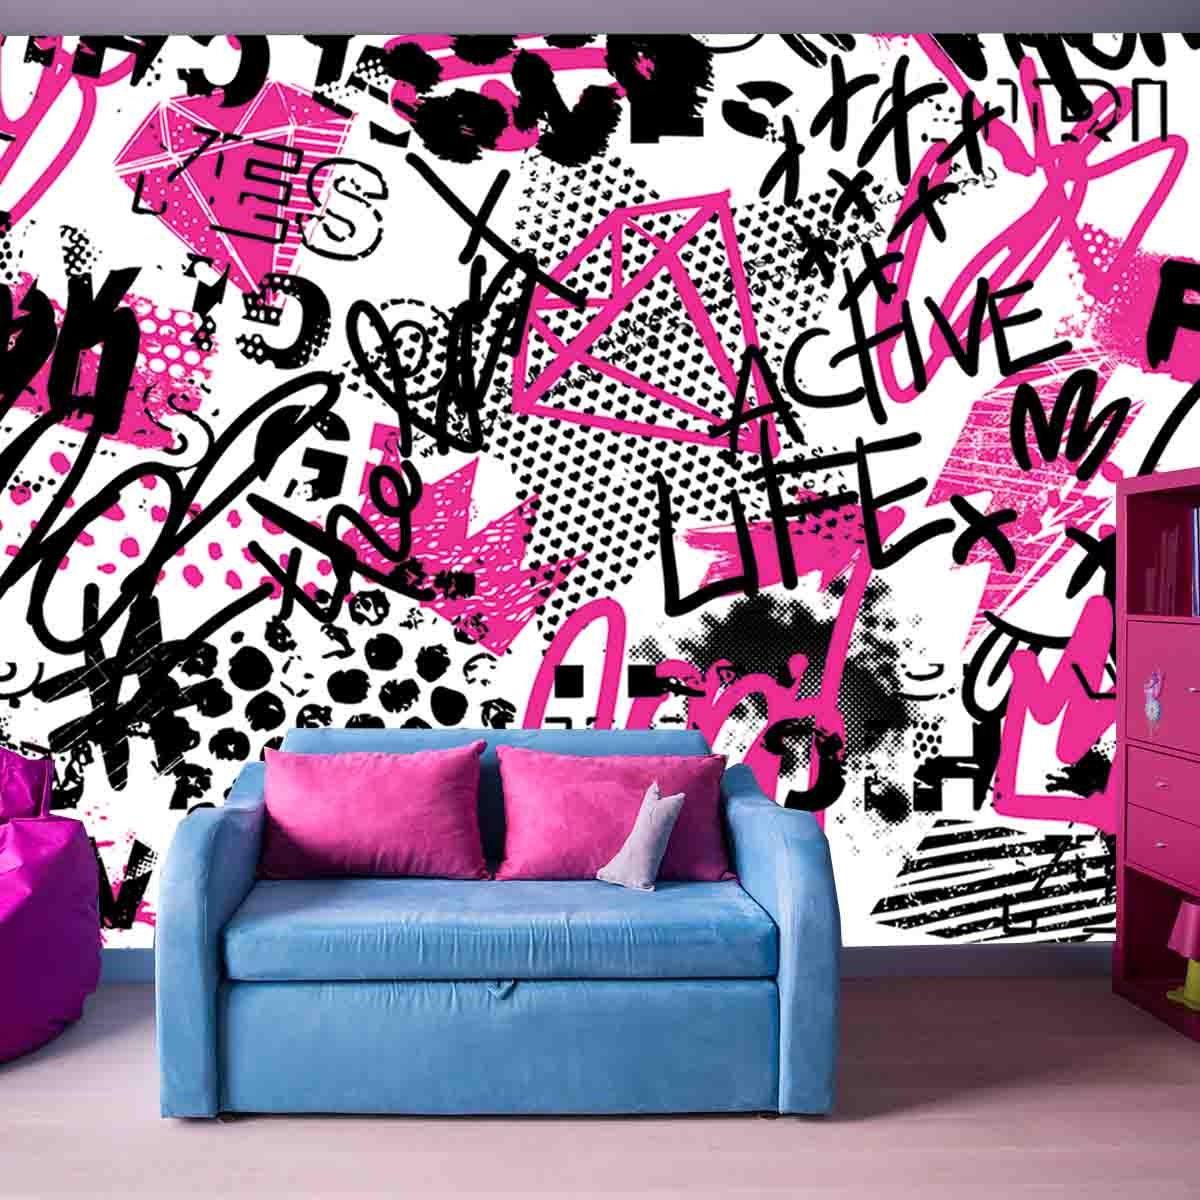 Abstract Seamless Chaotic Pattern with Urban Graffiti Words, Scuffed and Sprays Wallpaper Teen Girl Bedroom Mural